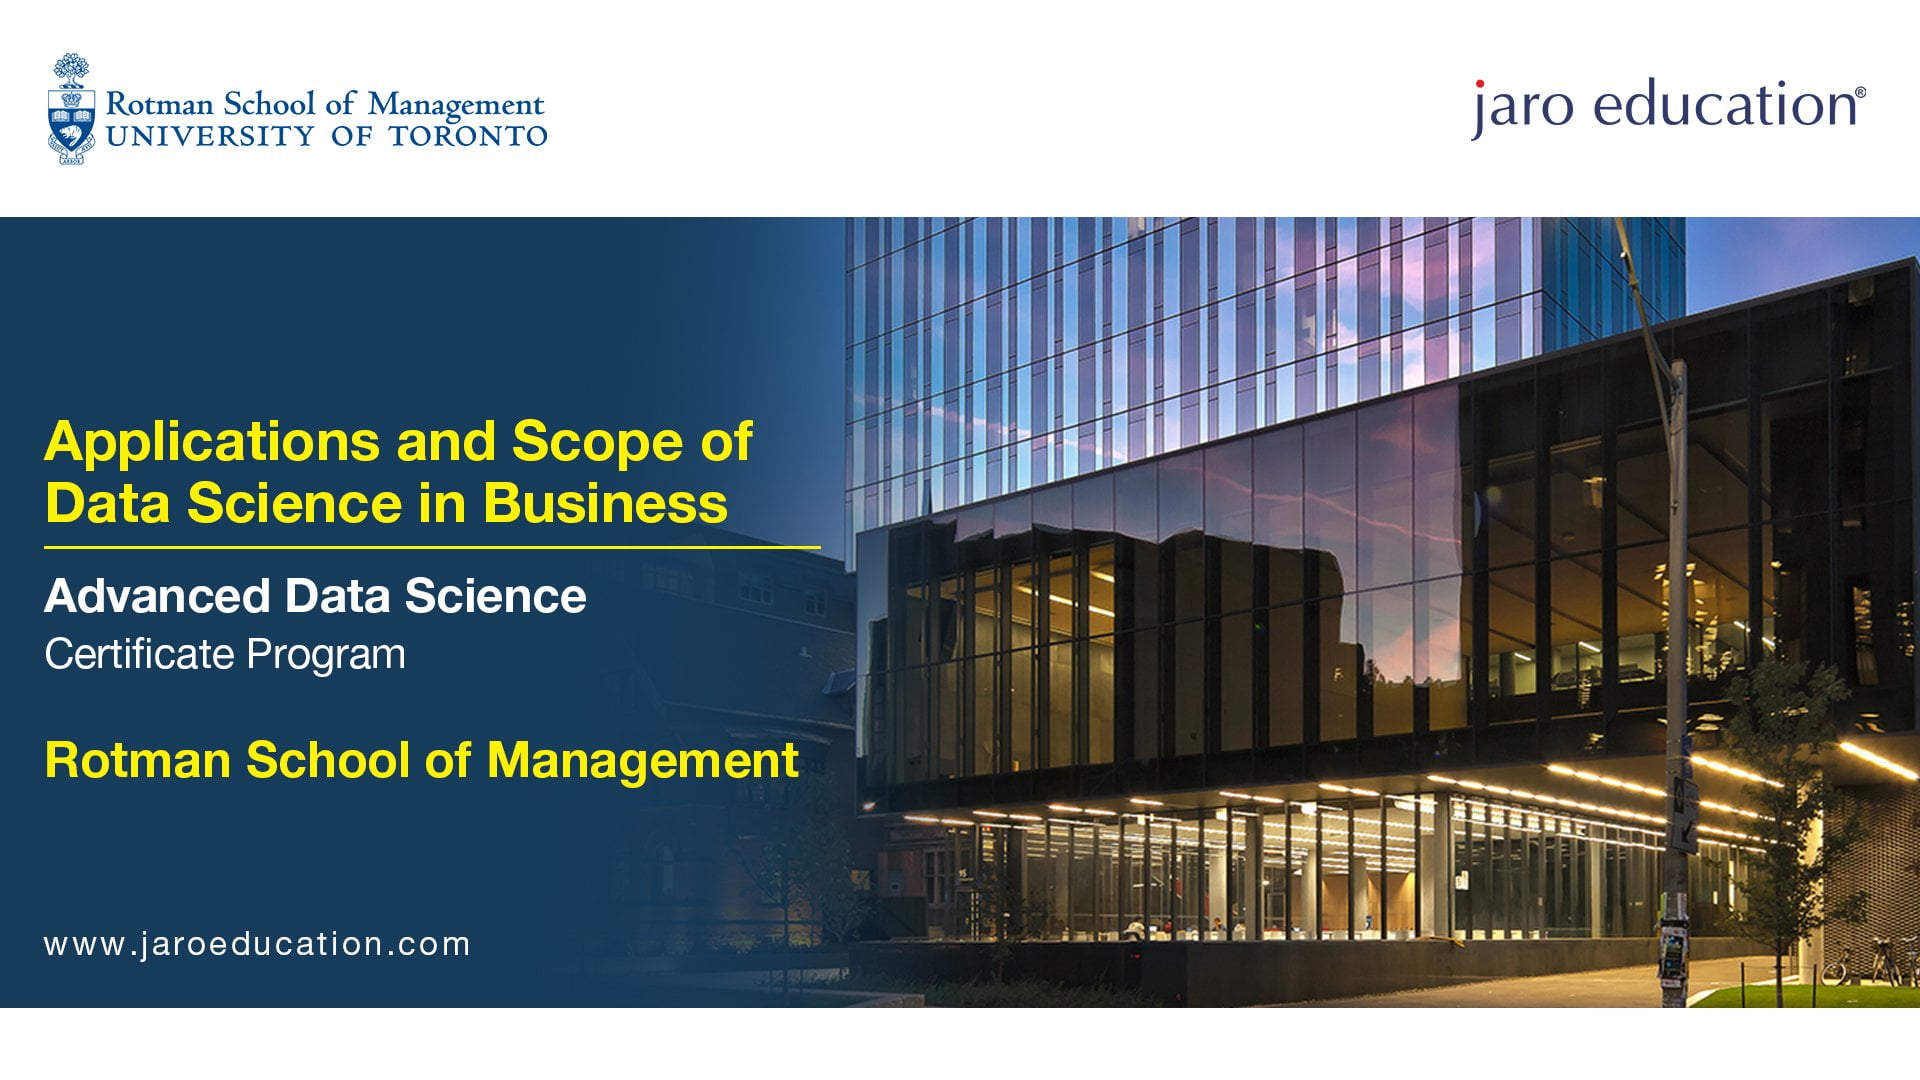 Applications-and-scope-of-Data-Science-and-Business jaro